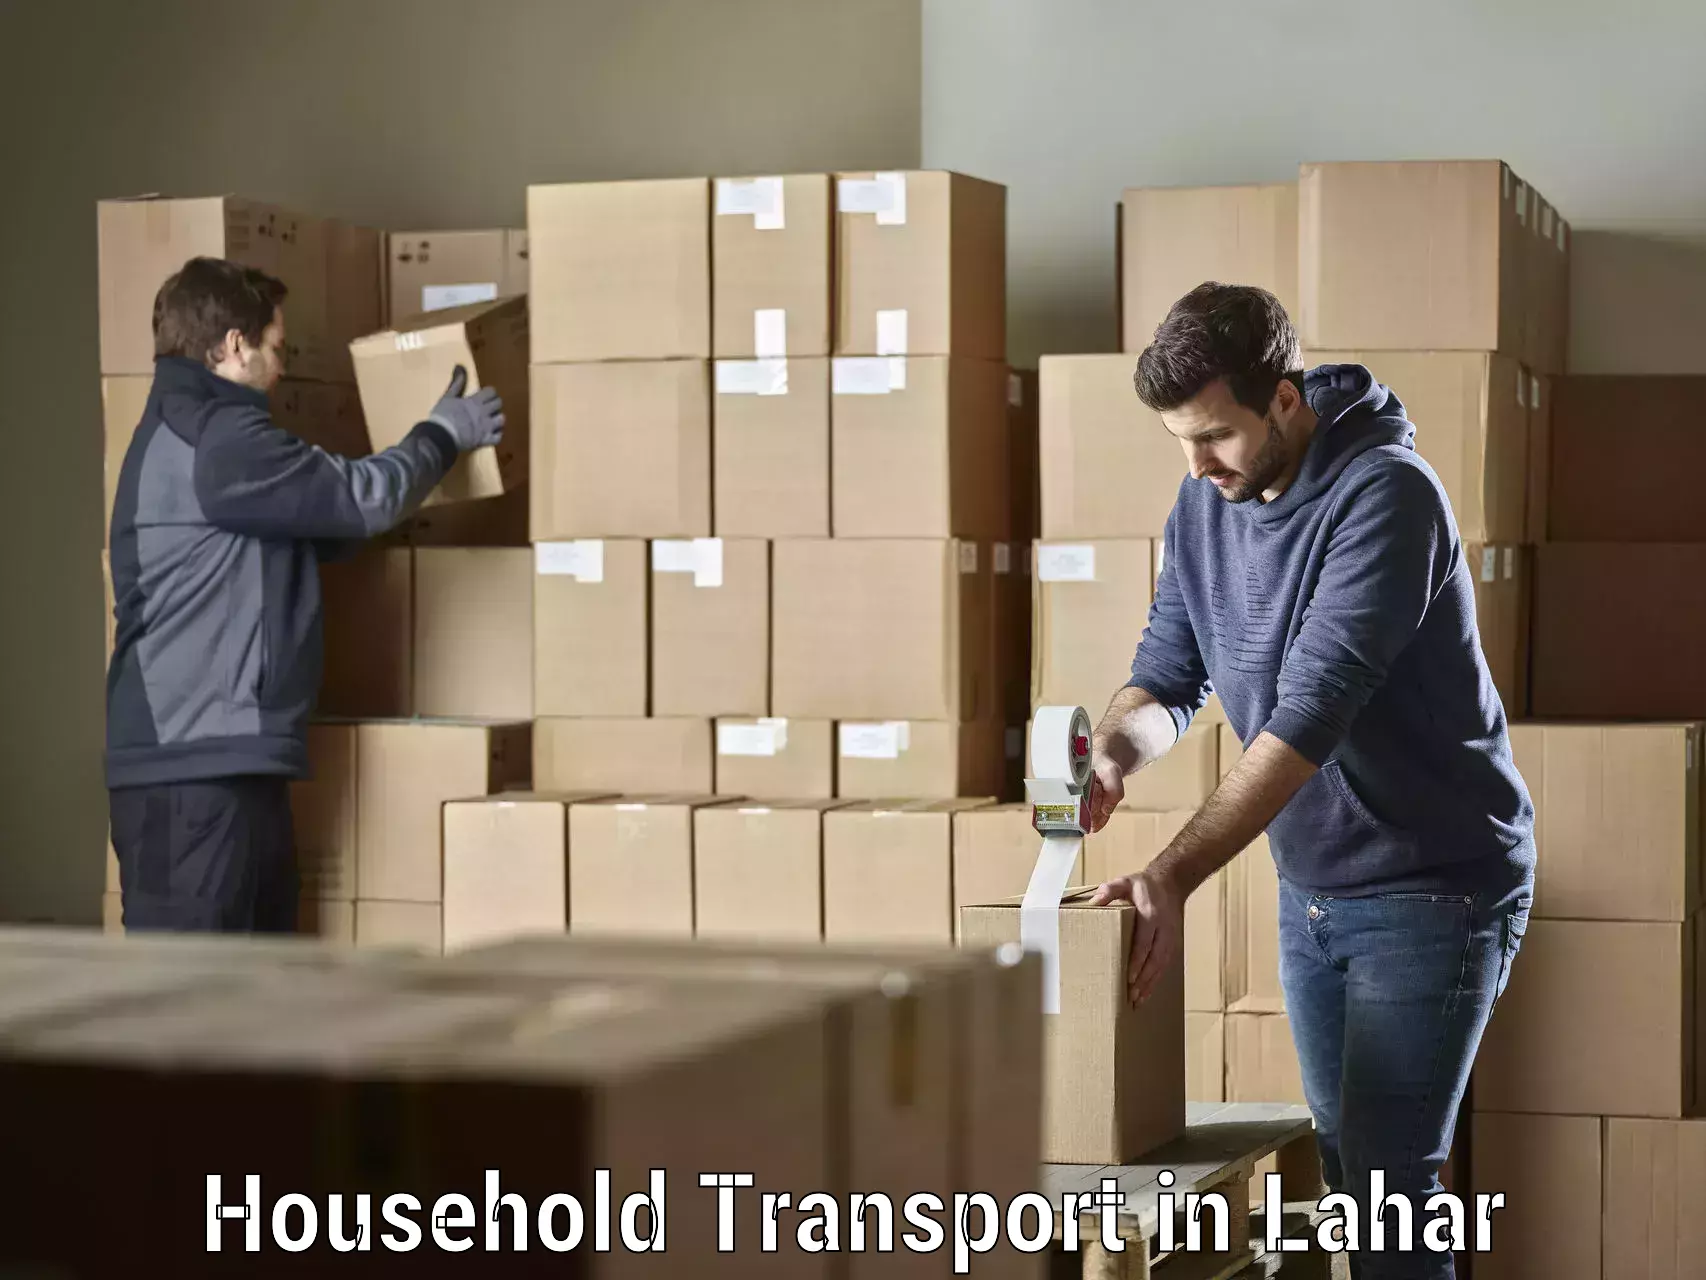 Furniture shipping services in Lahar